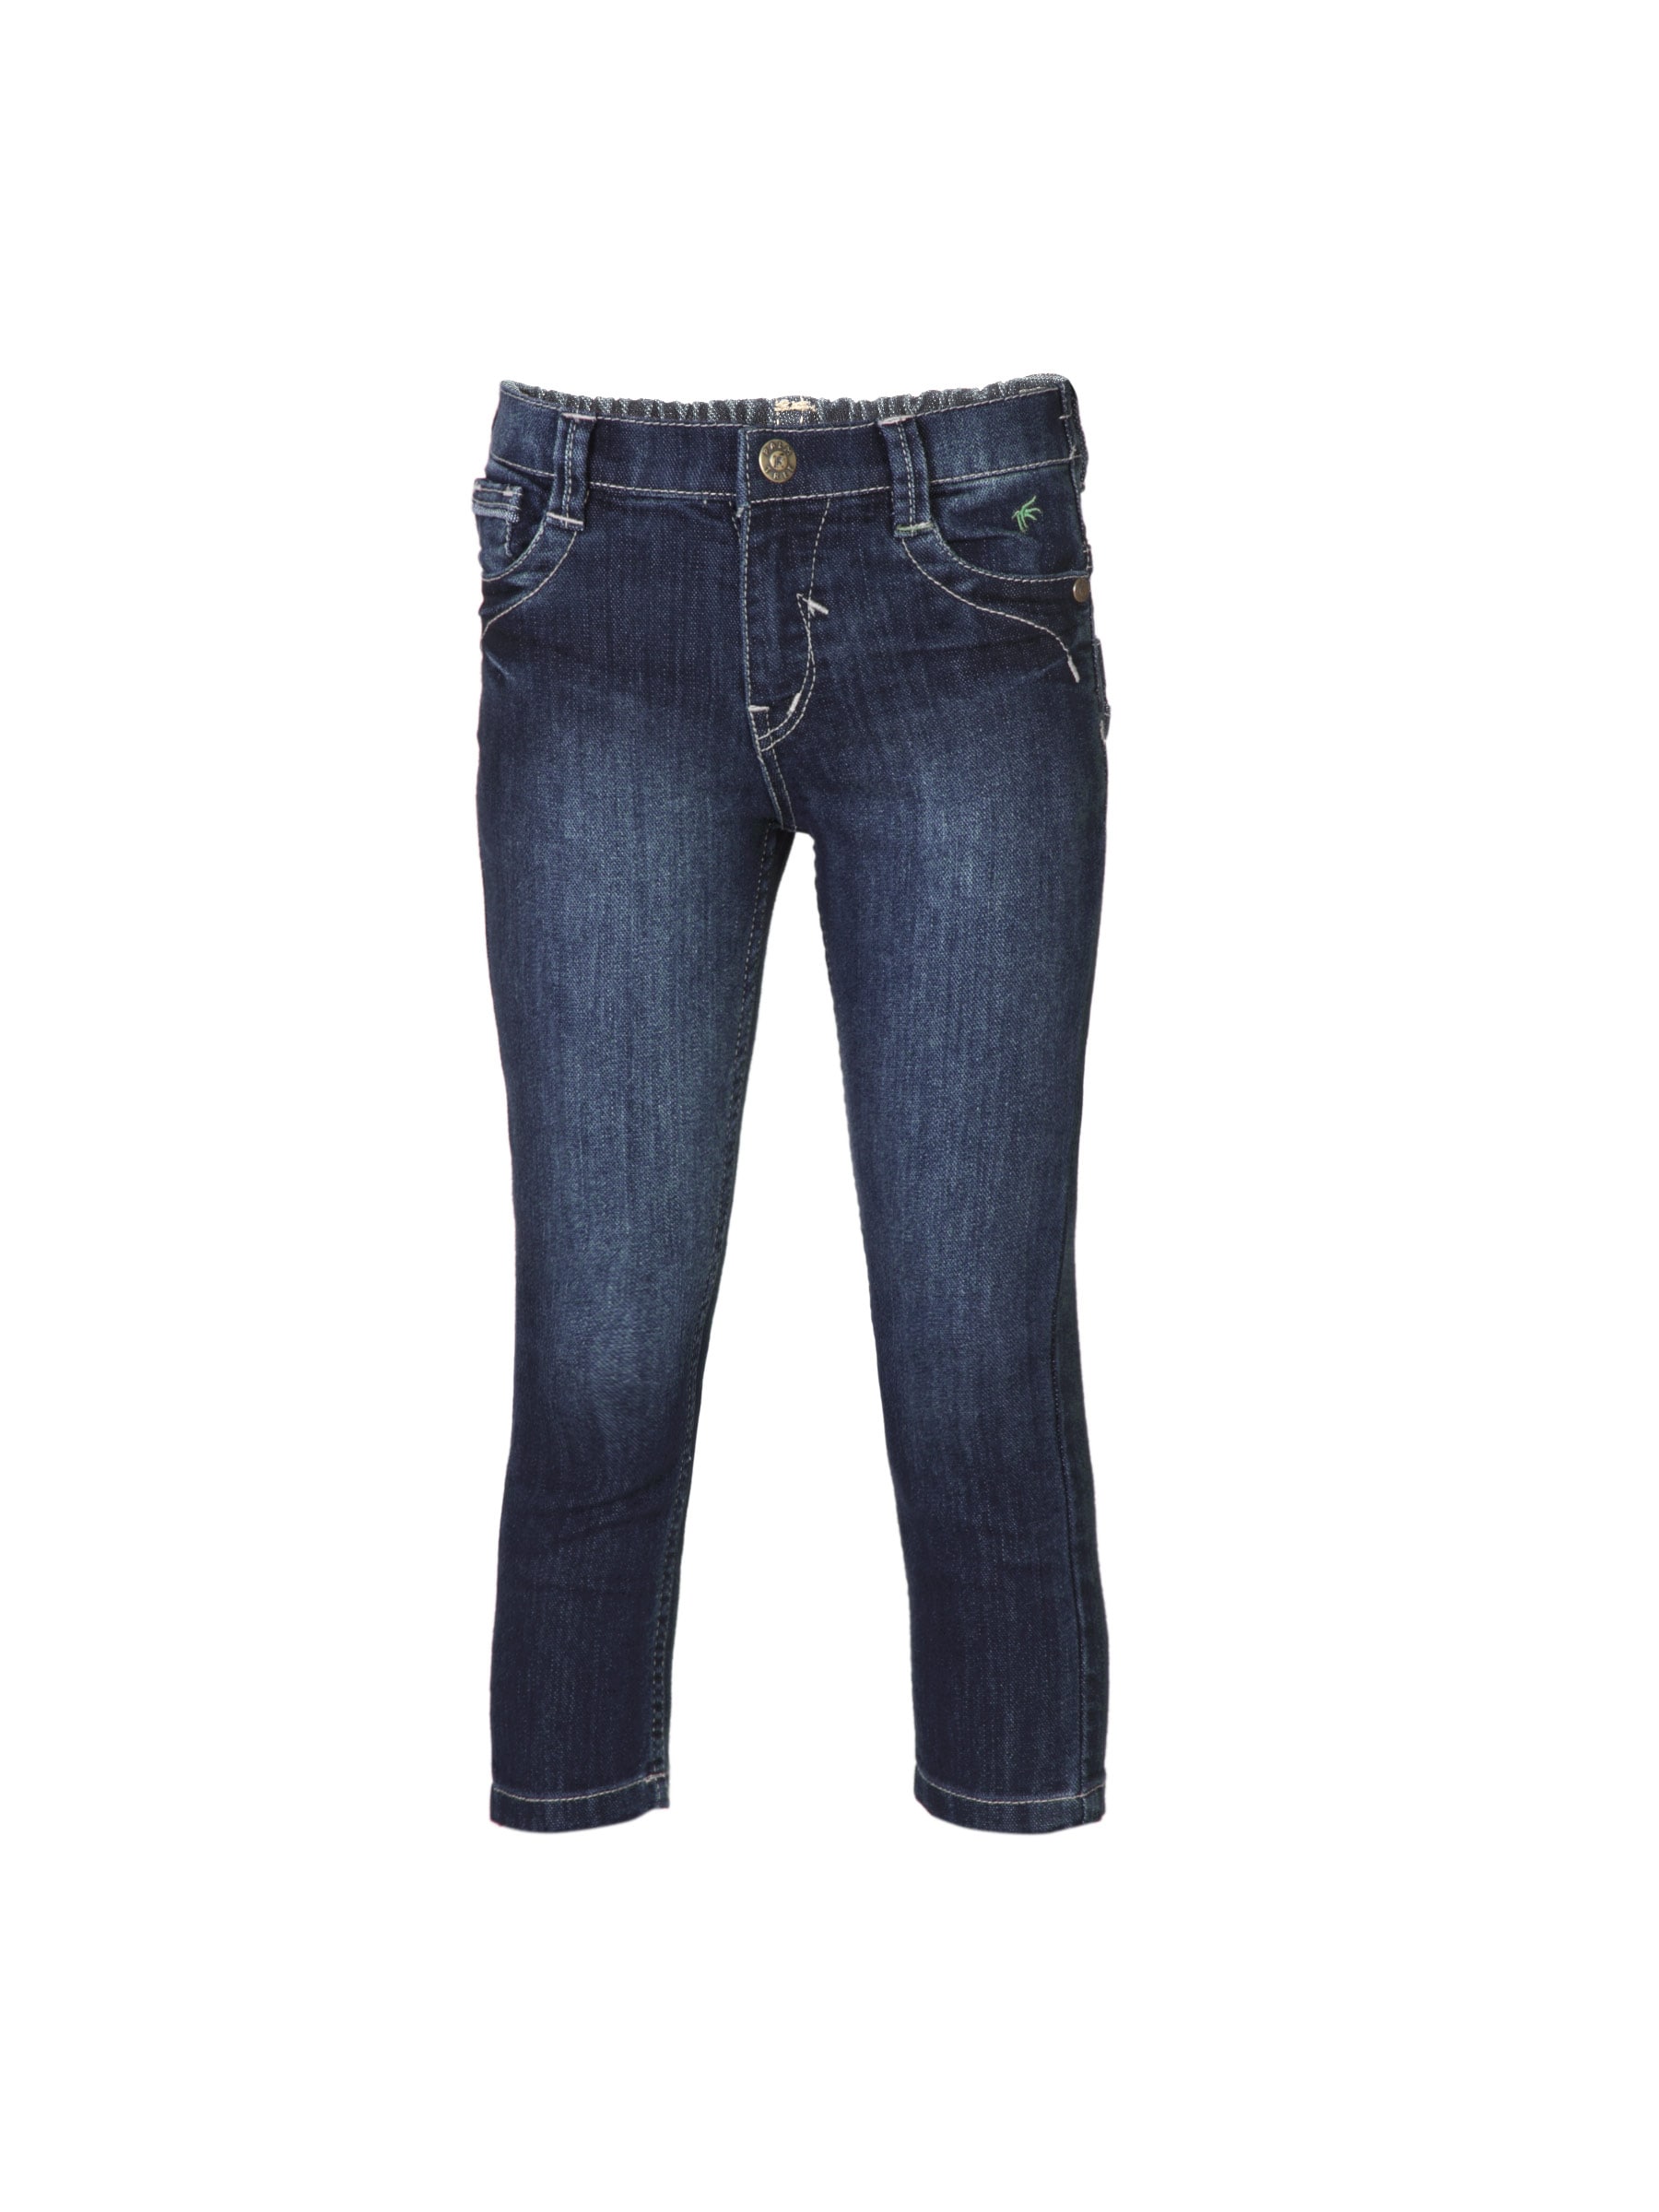 Gini and Jony Girls Woven Navy Blue Jeans